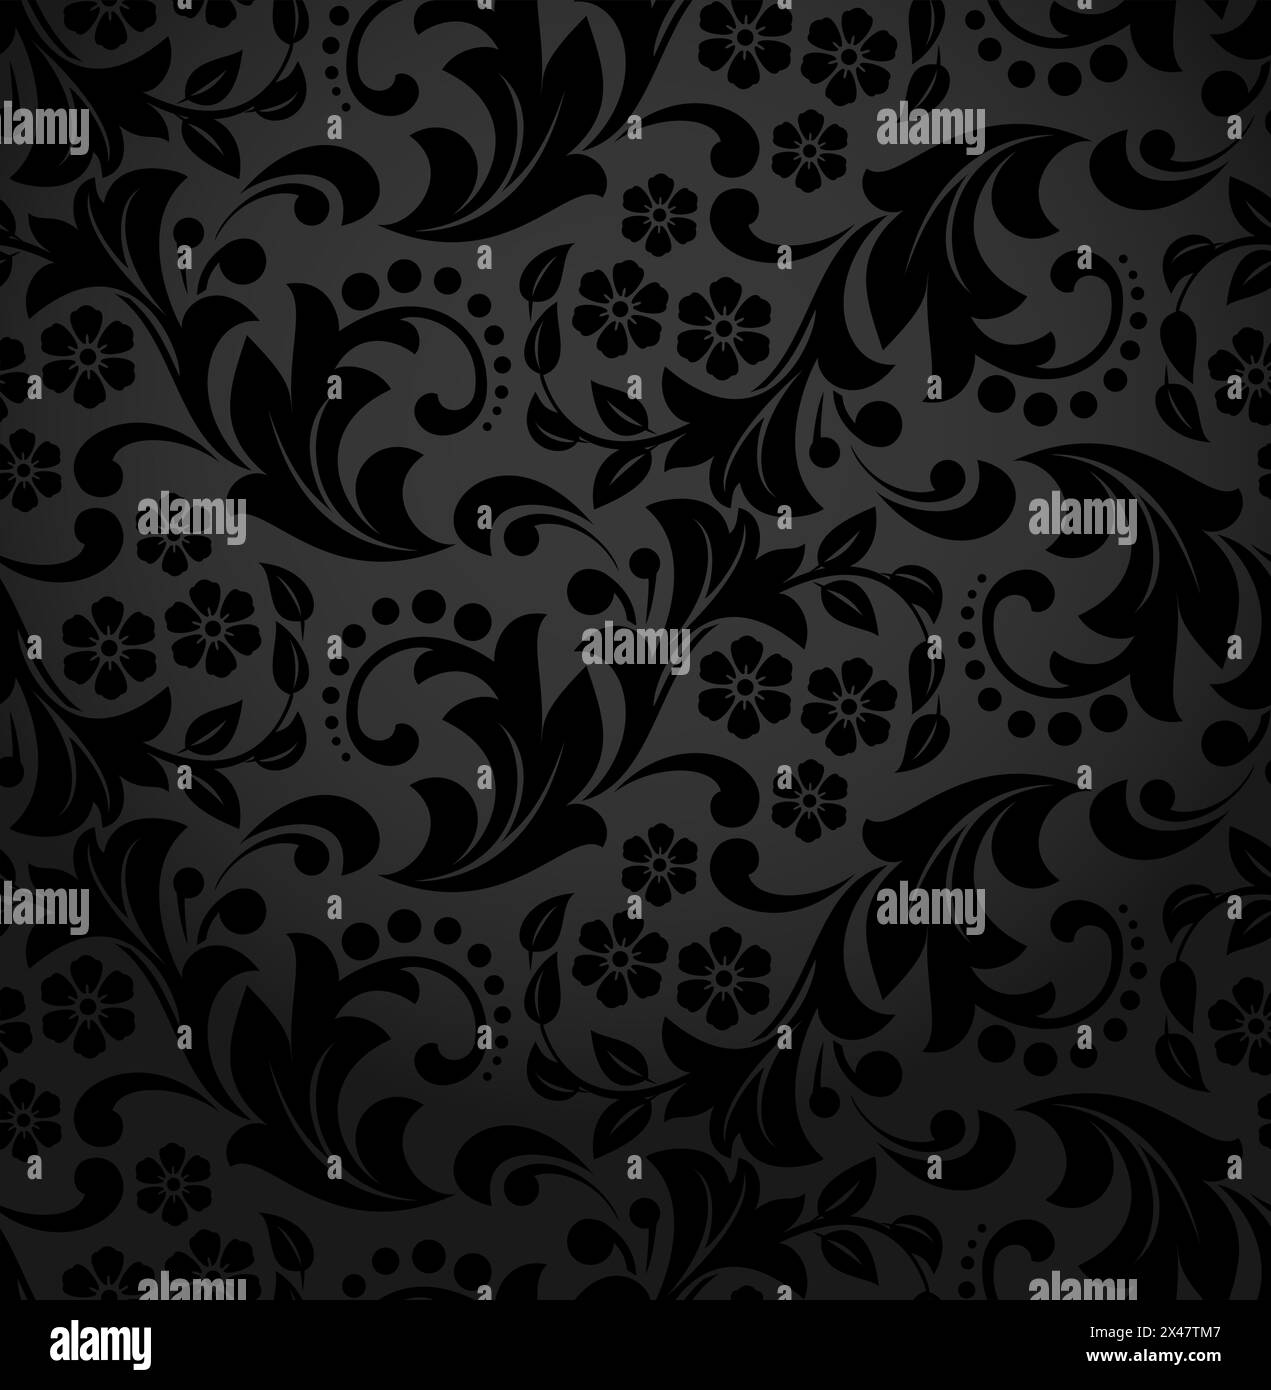 Floral pattern. Wallpaper baroque, damask. Seamless vector background. Black ornament Stock Vector